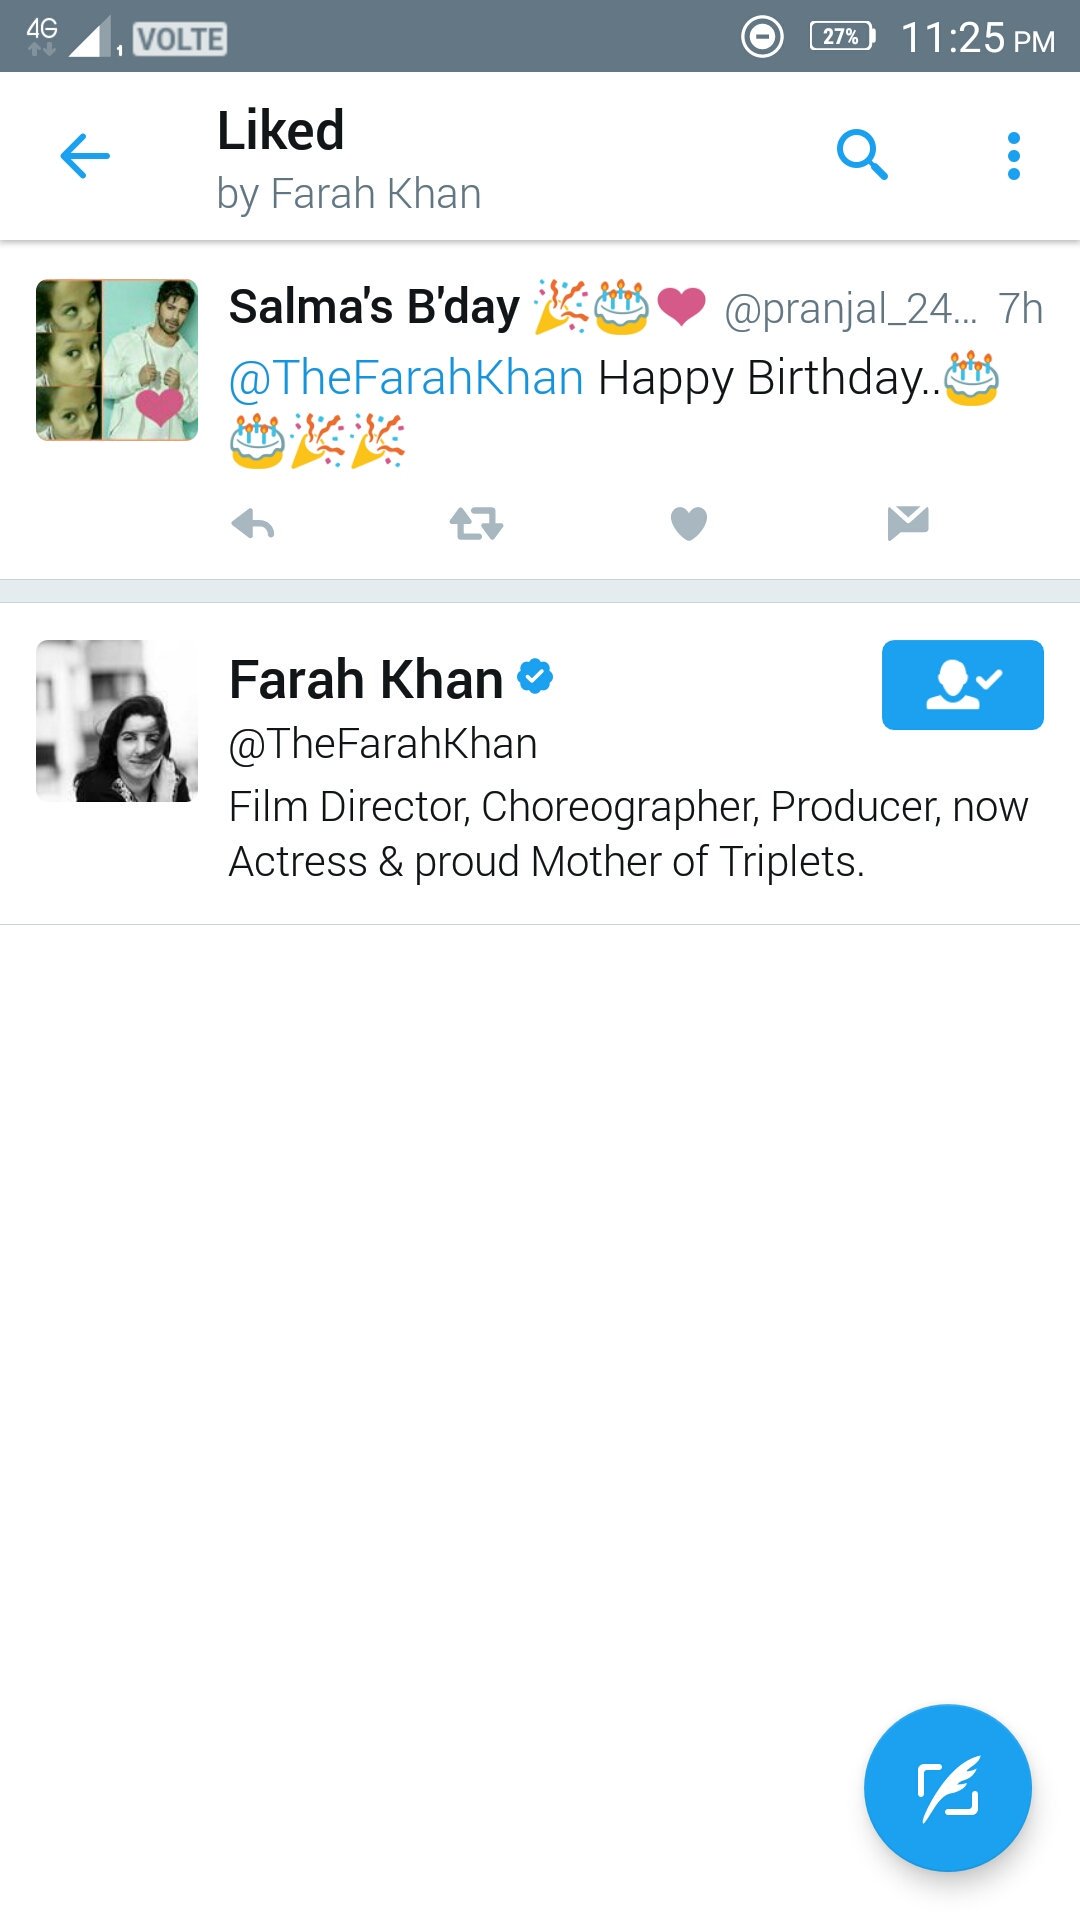 Omg can\t believe this THE FARAH KHAN LIKED MY message..  HAPPY BIRTHDAY FARAH MAM! I LOVE YOU.. 